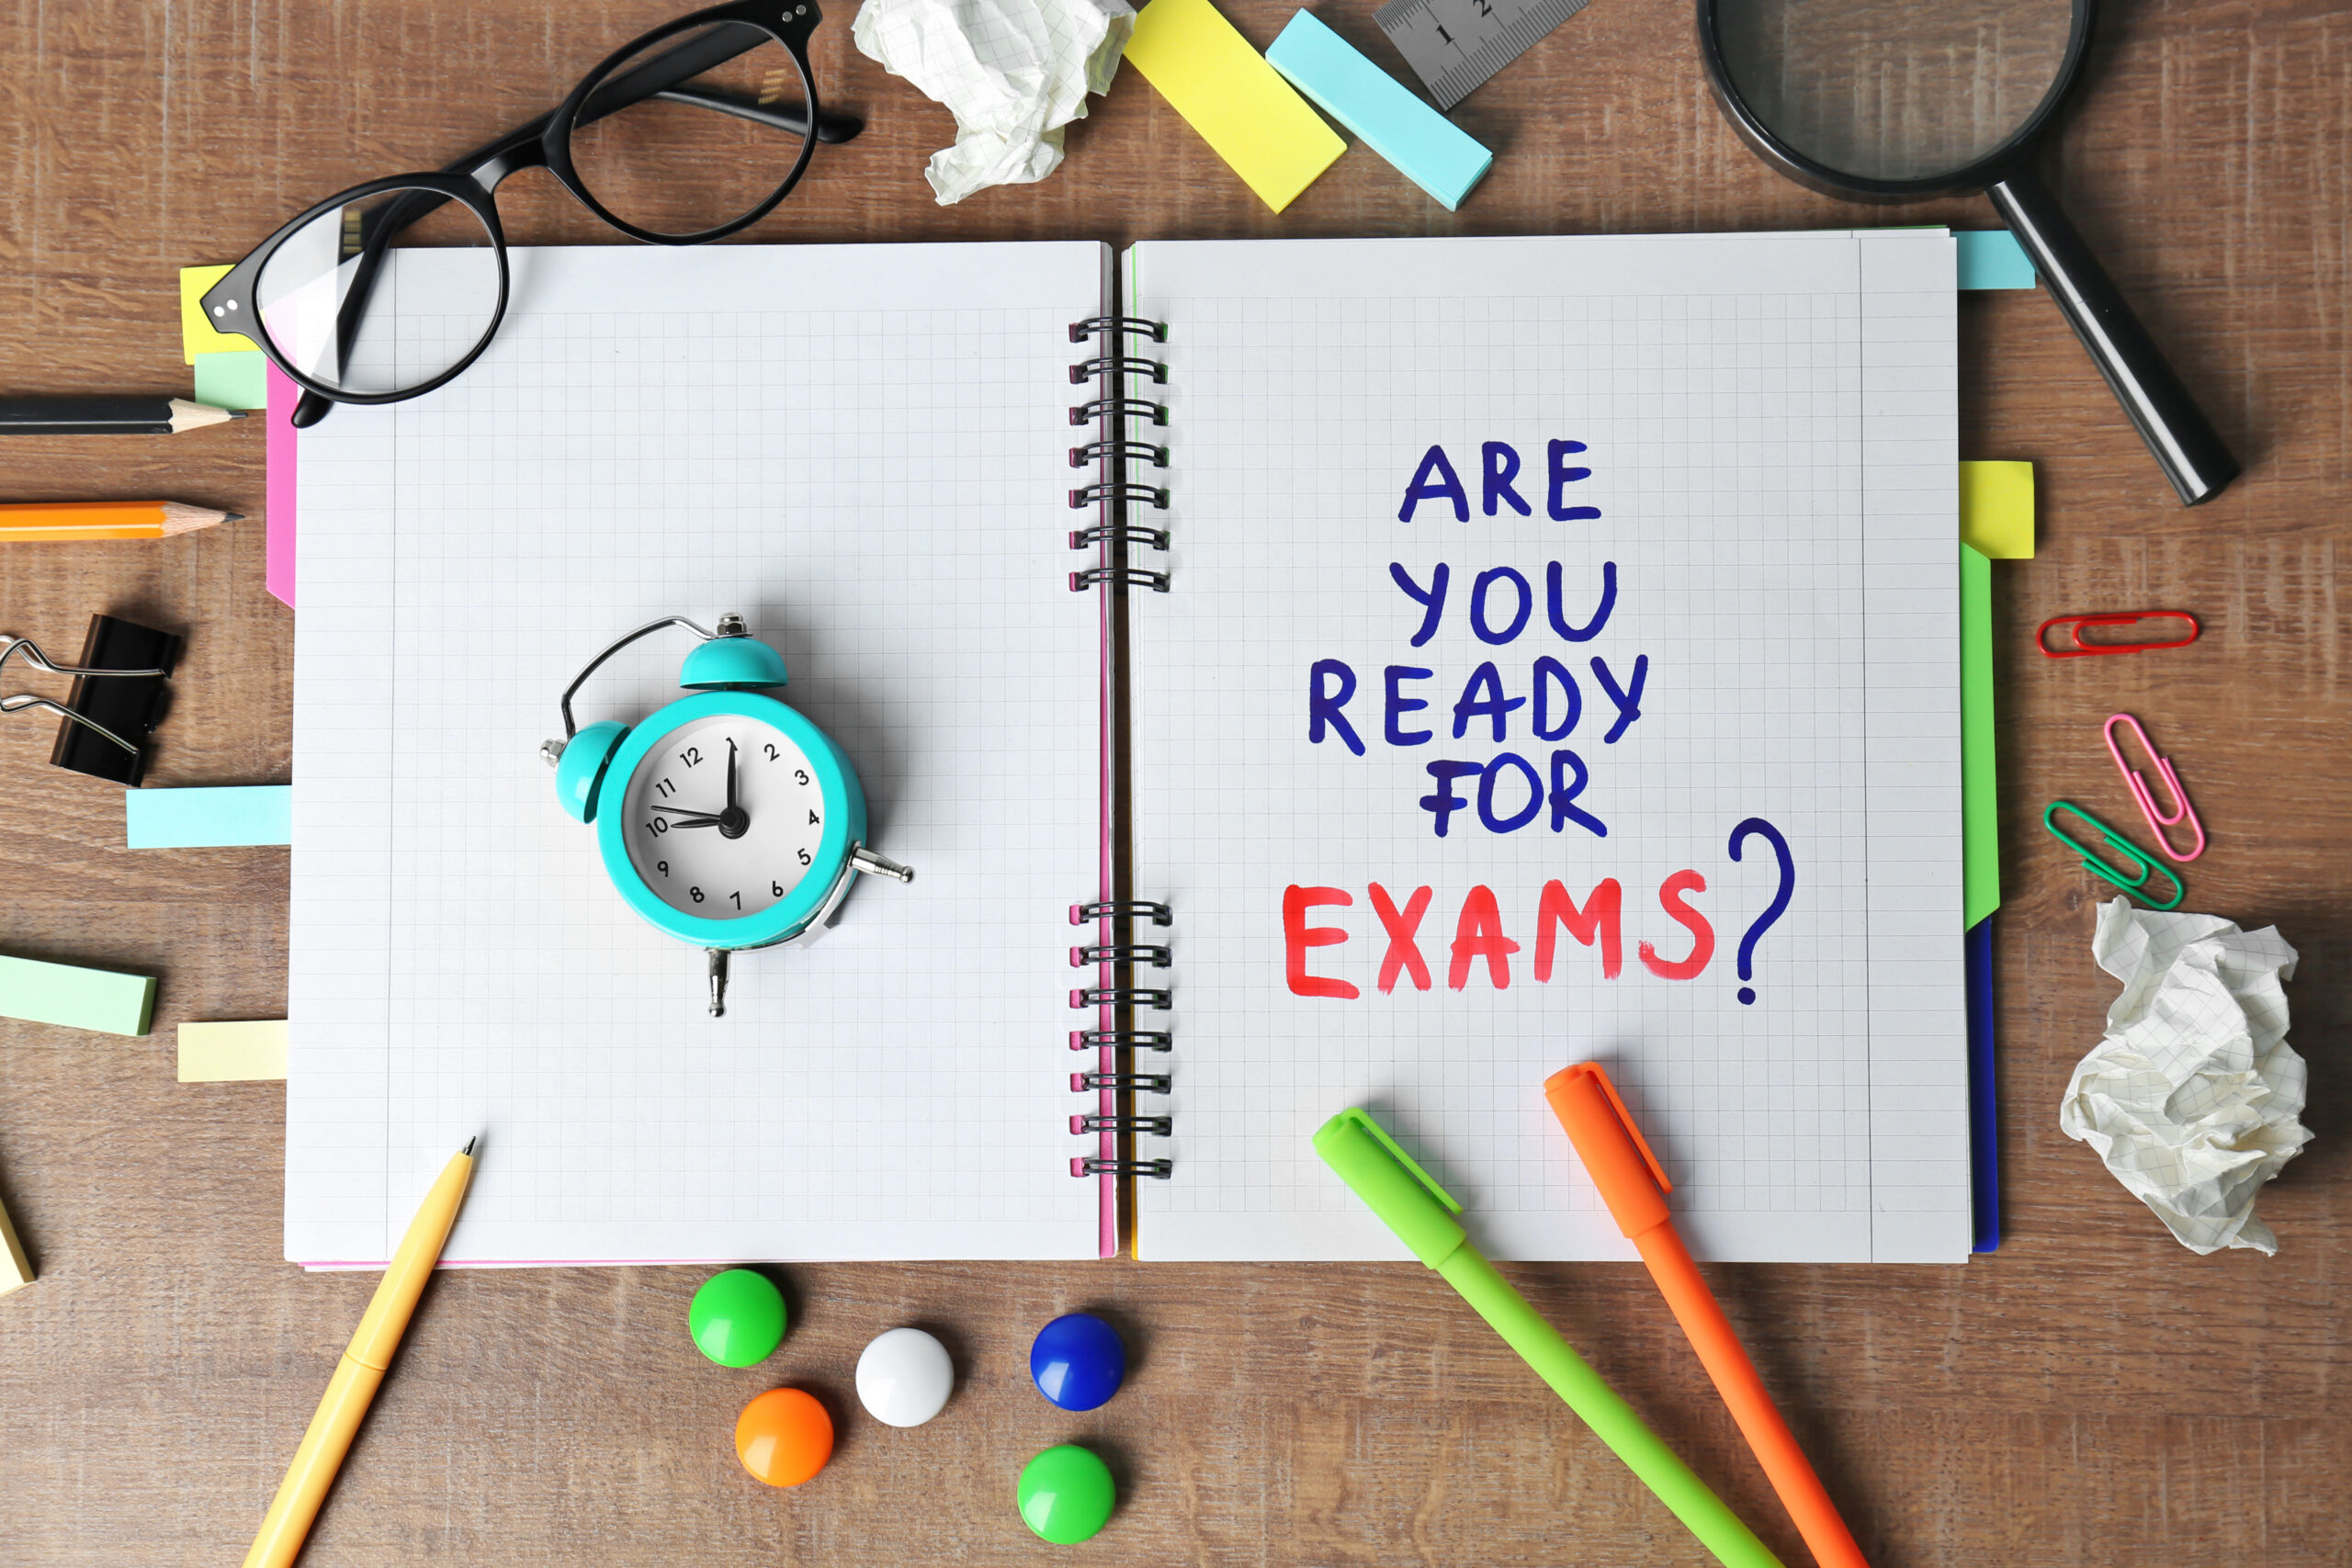 Exams pictures. Exam картинка. Are you ready for Exams. Are you ready for Exams картинки. Get ready for the Test.